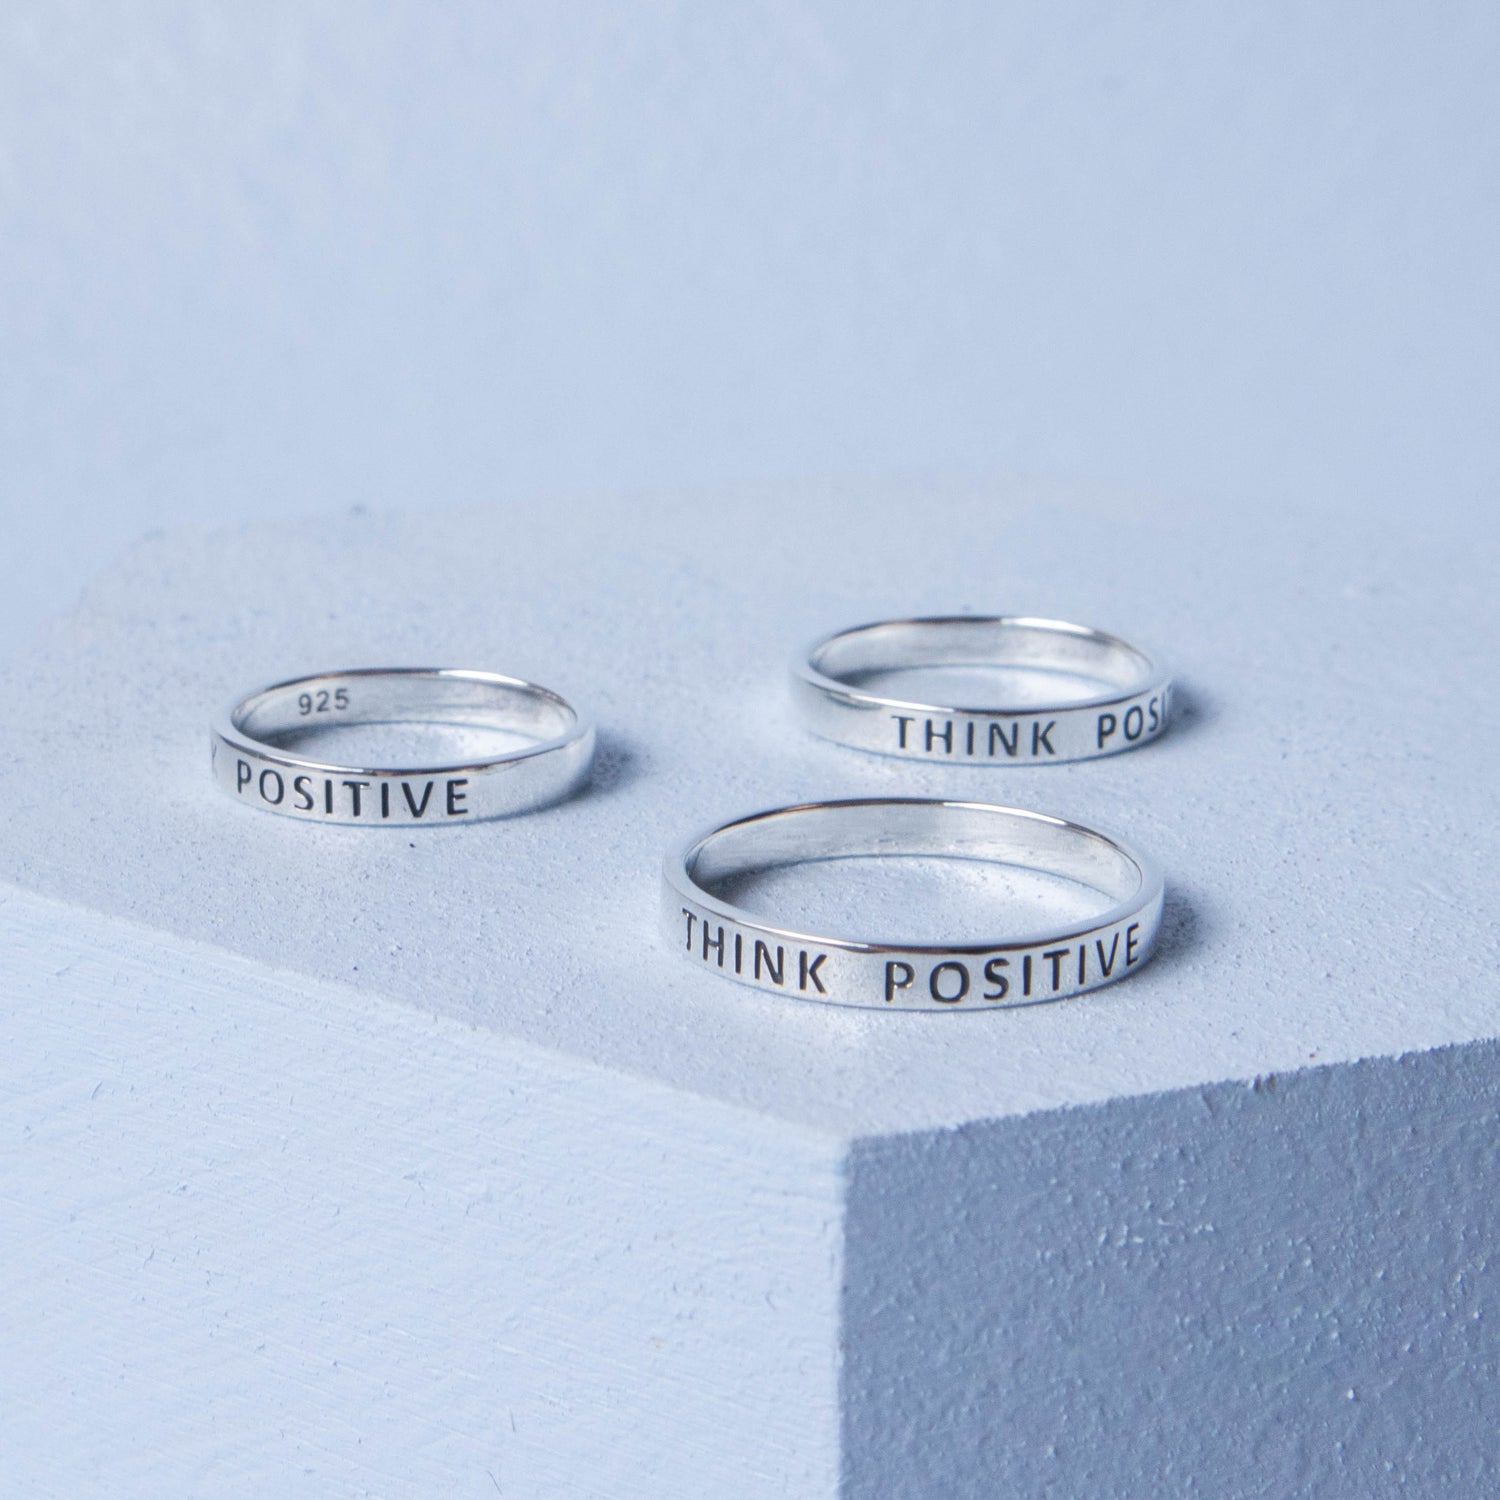 think positive, positivity, think positive ring, sterling silver ring, sterling silver jewelry, silver ring, silver jewelry